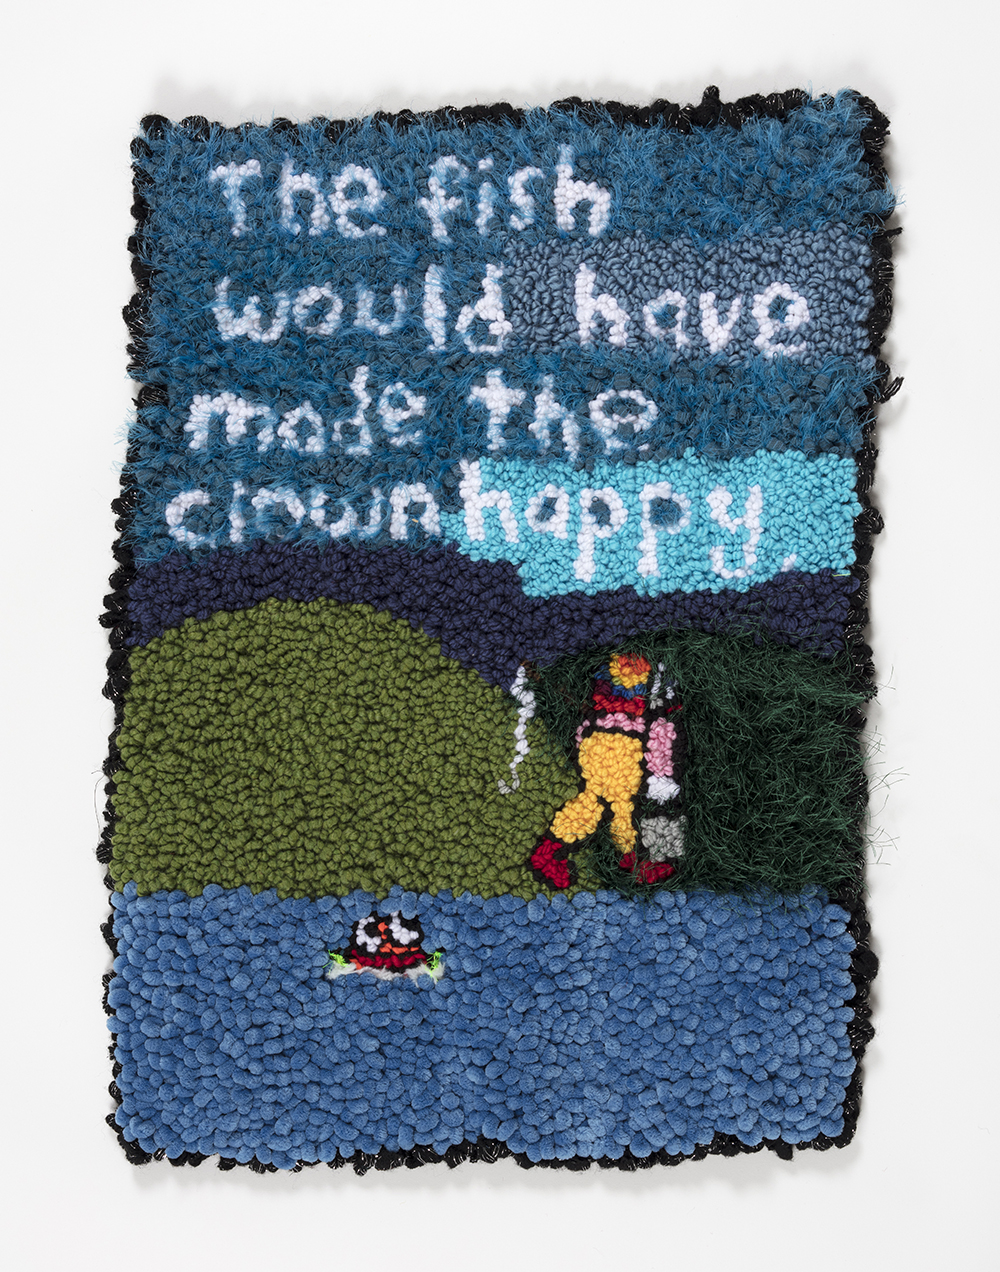 Hannah Epstein.<em> The Fish Would Have Made the Clown Happy</em>, 2019. Wool, acrylic, polyester and burlap, 30 x 22 inches  (76.2 x 55.9 cm)